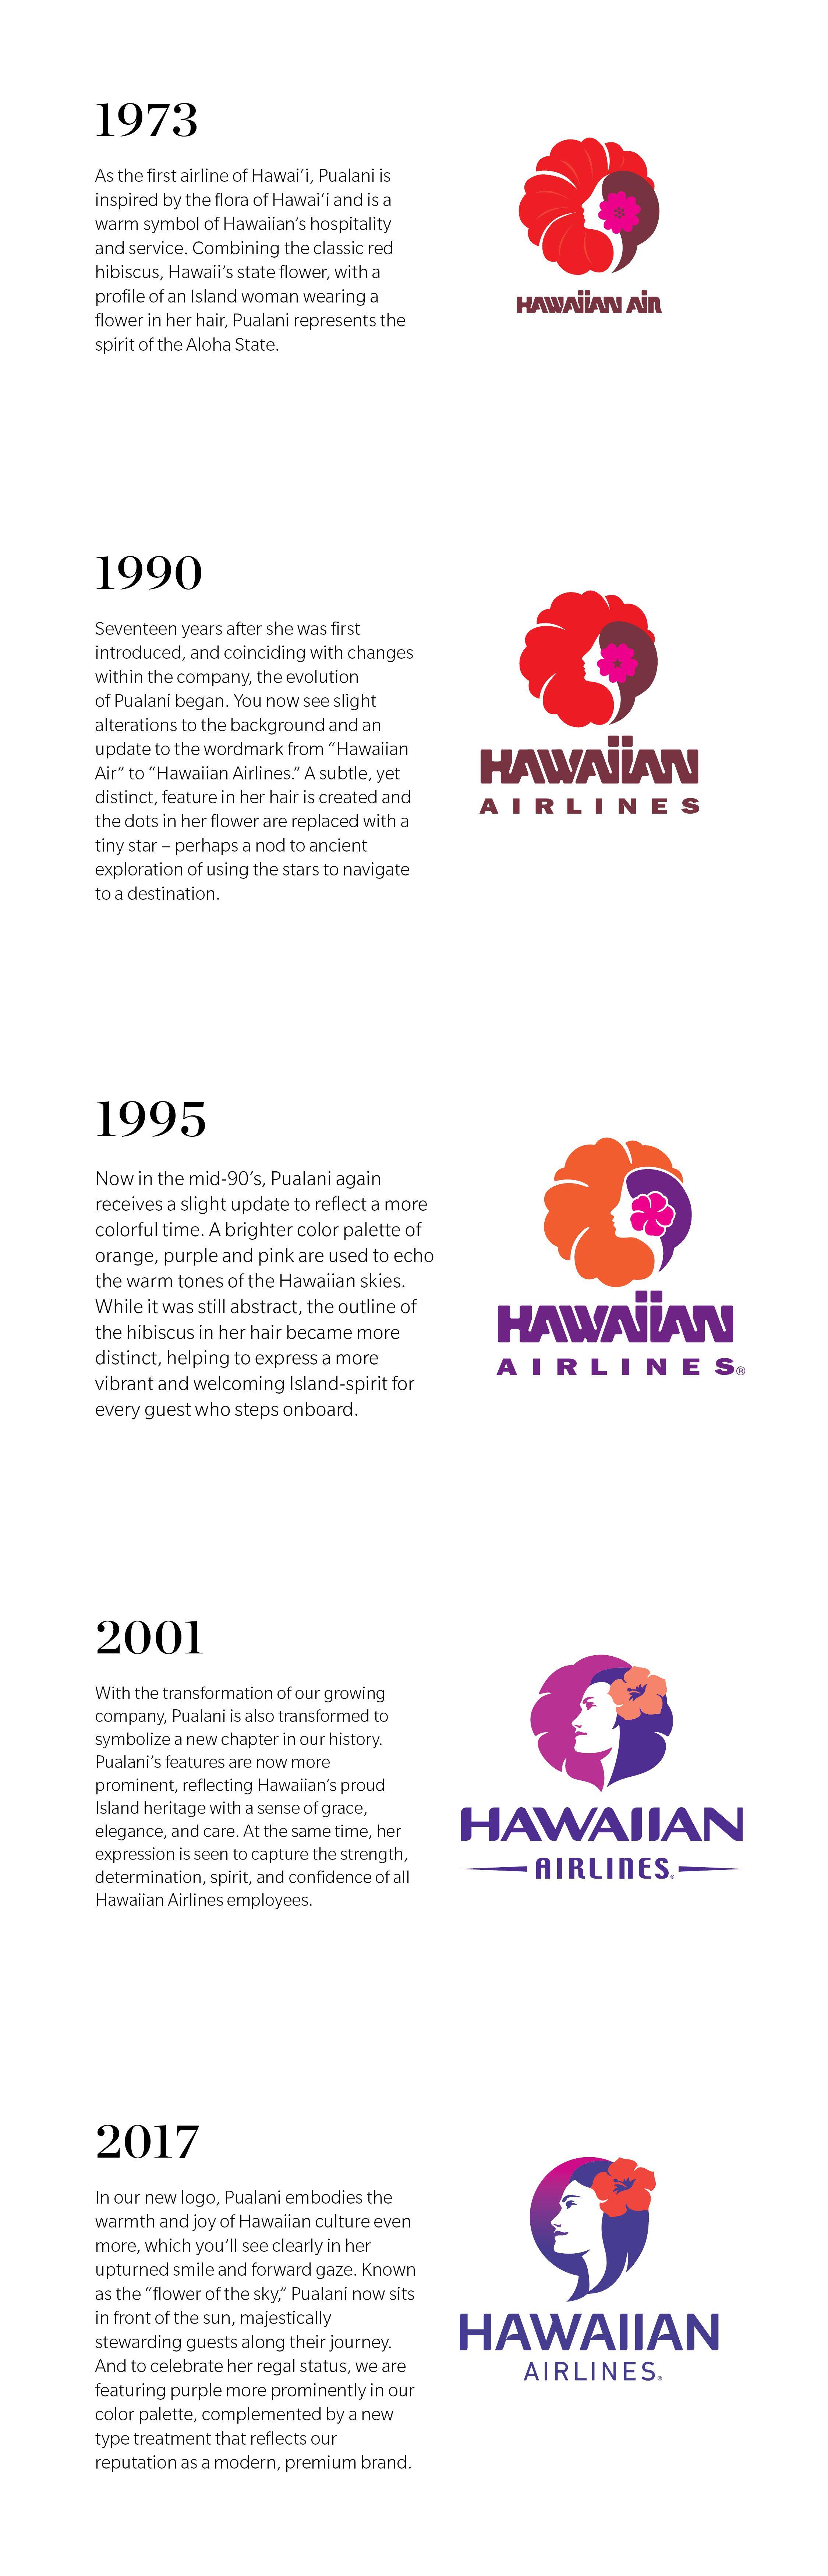 Hawaiian Airlines Logo - Hawaiian Airlines Unveils New Brand and Livery | Hawaiian Airlines ...